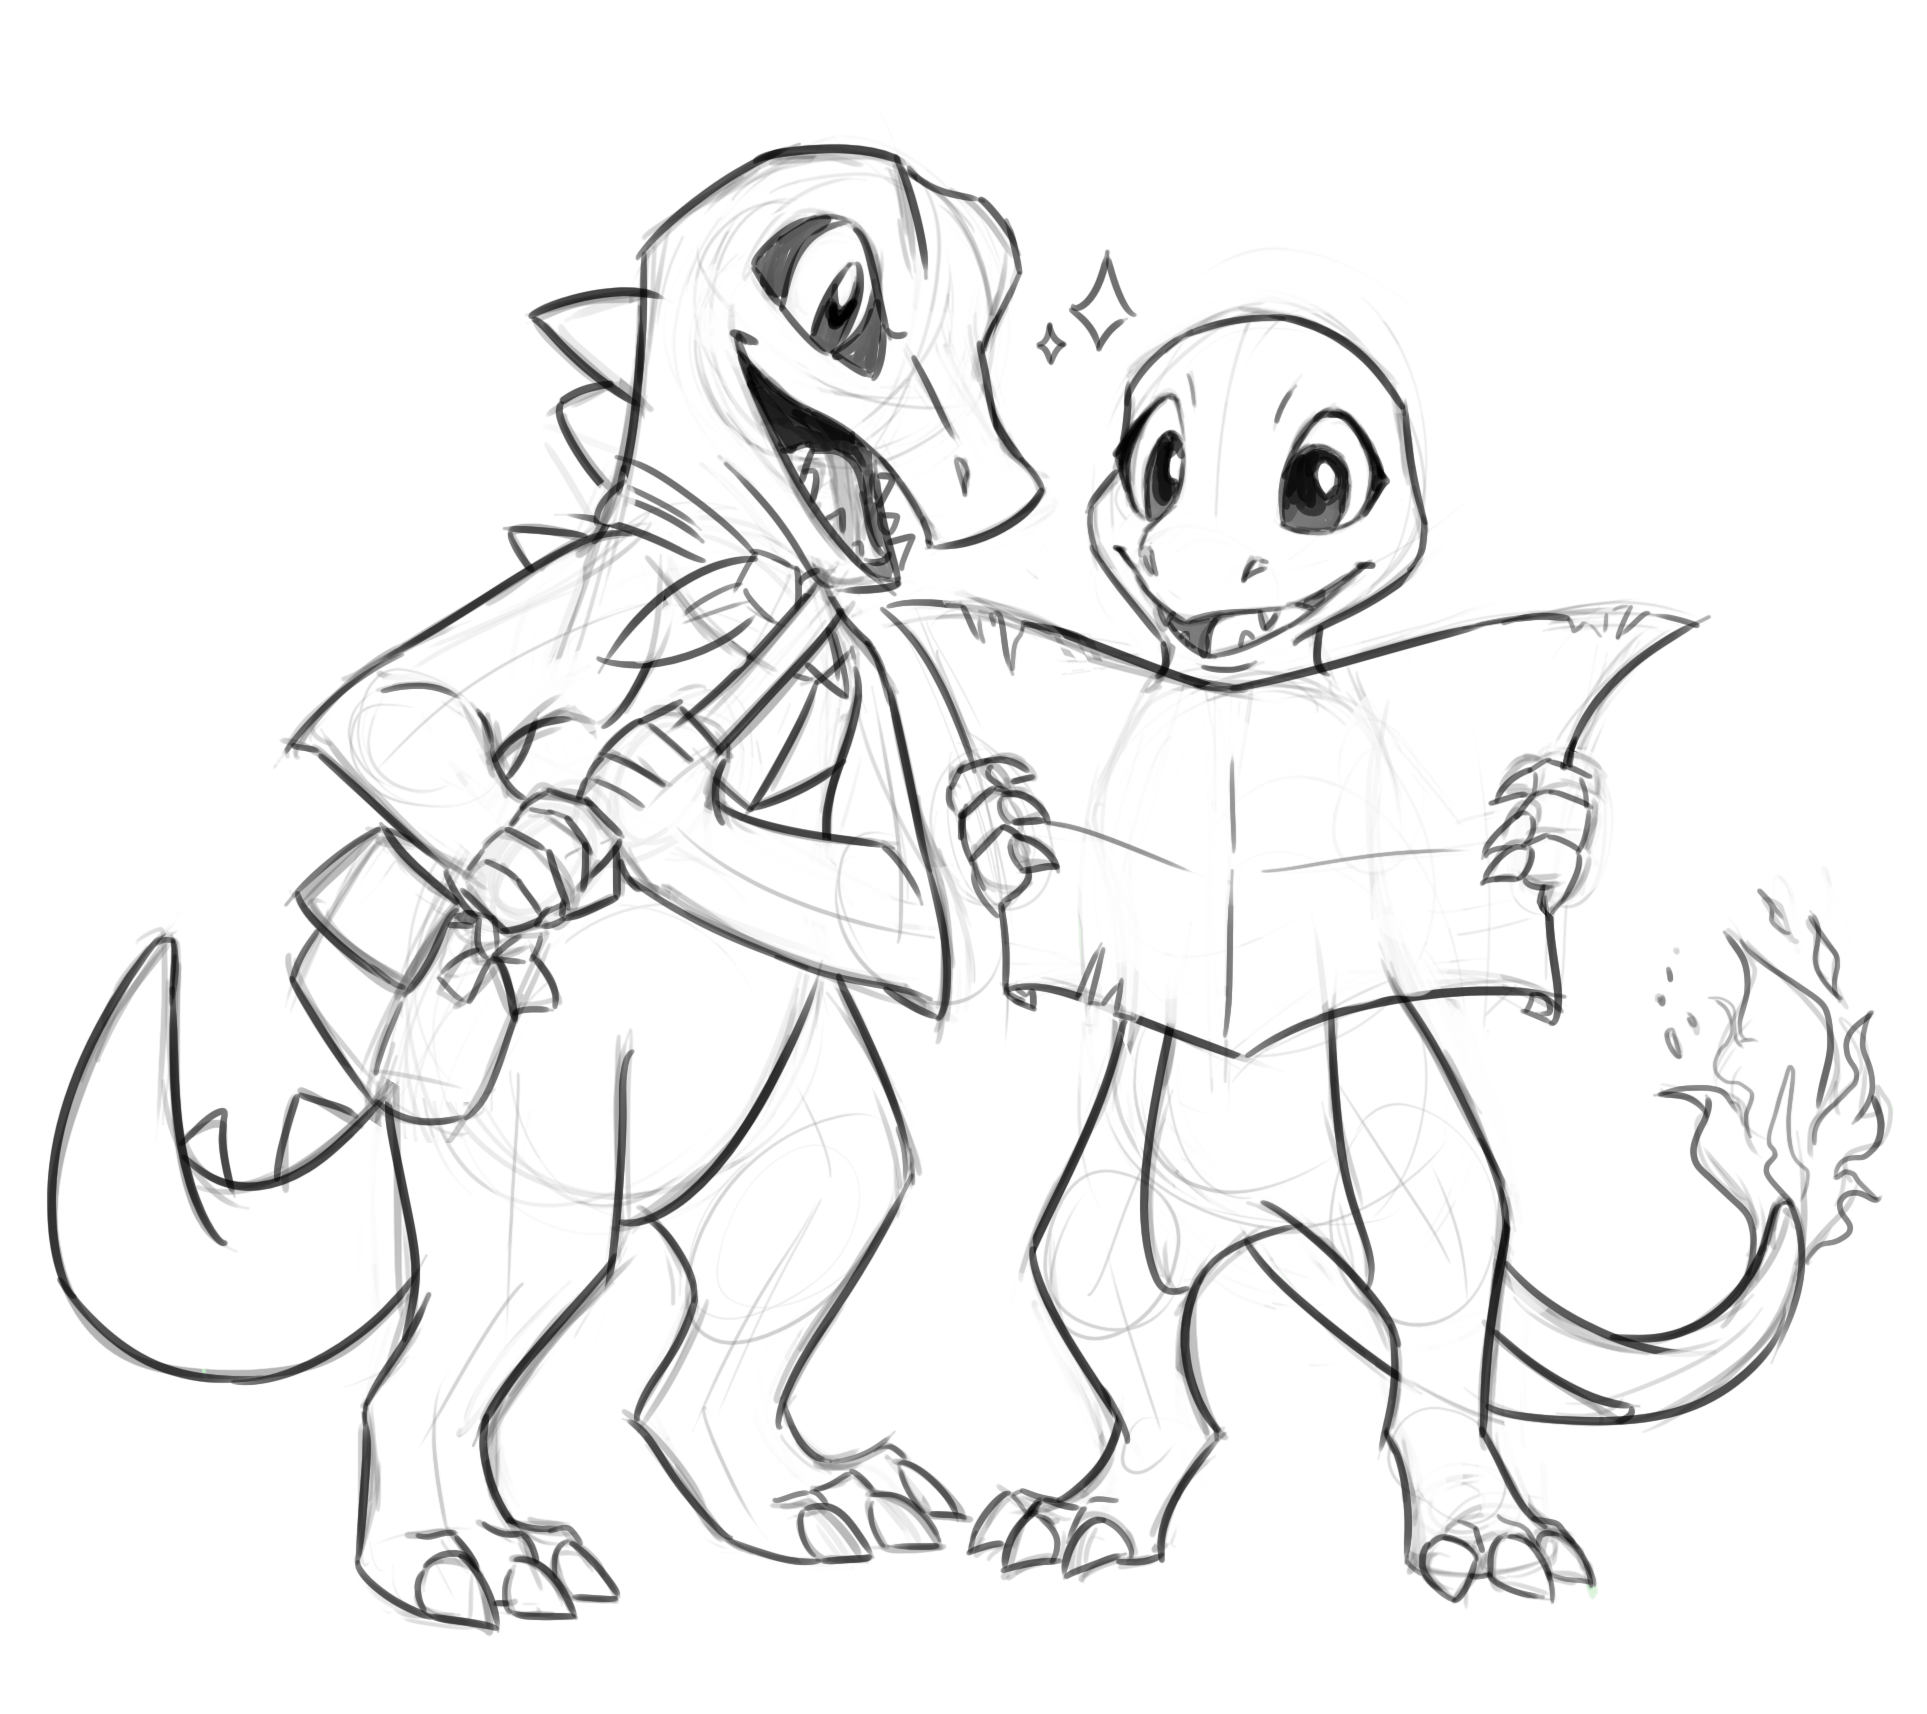 Got inspired after my recent playthrough of eos totodile and charmander rmysterydungeon